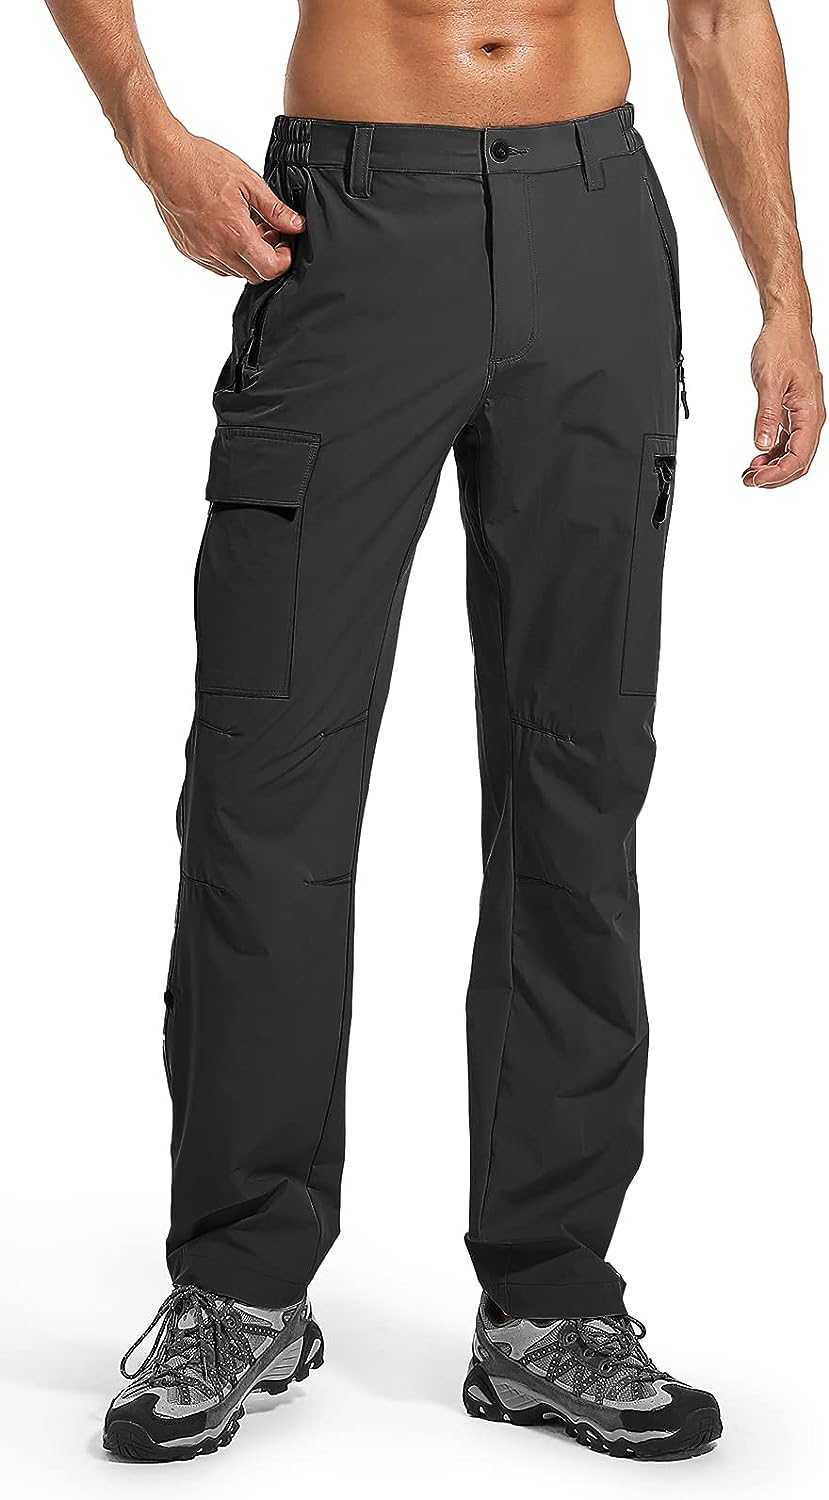 Men's Hiking Cargo Pants Lightweight Quick Dry Waterproof Fishing Pants for Tactical Outdoor Hunting Camping